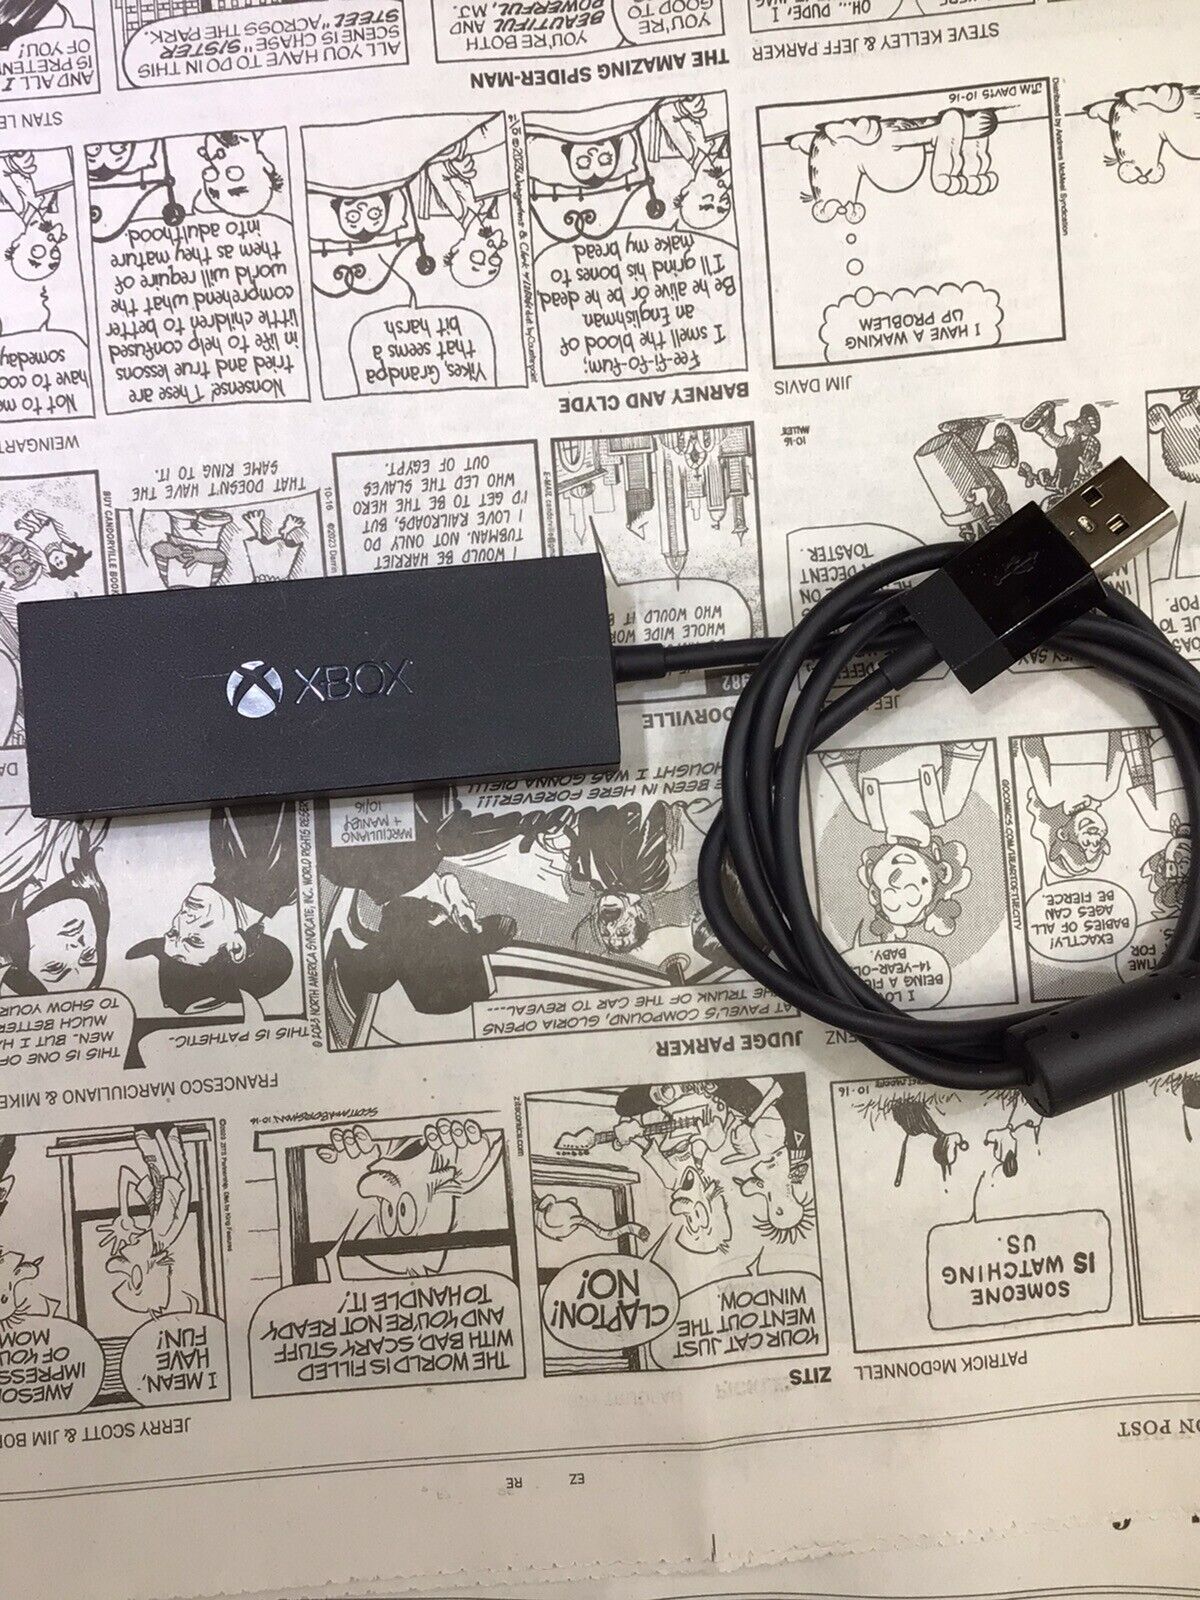 Microsoft Xbox One Official Digital TV Tuner 1611